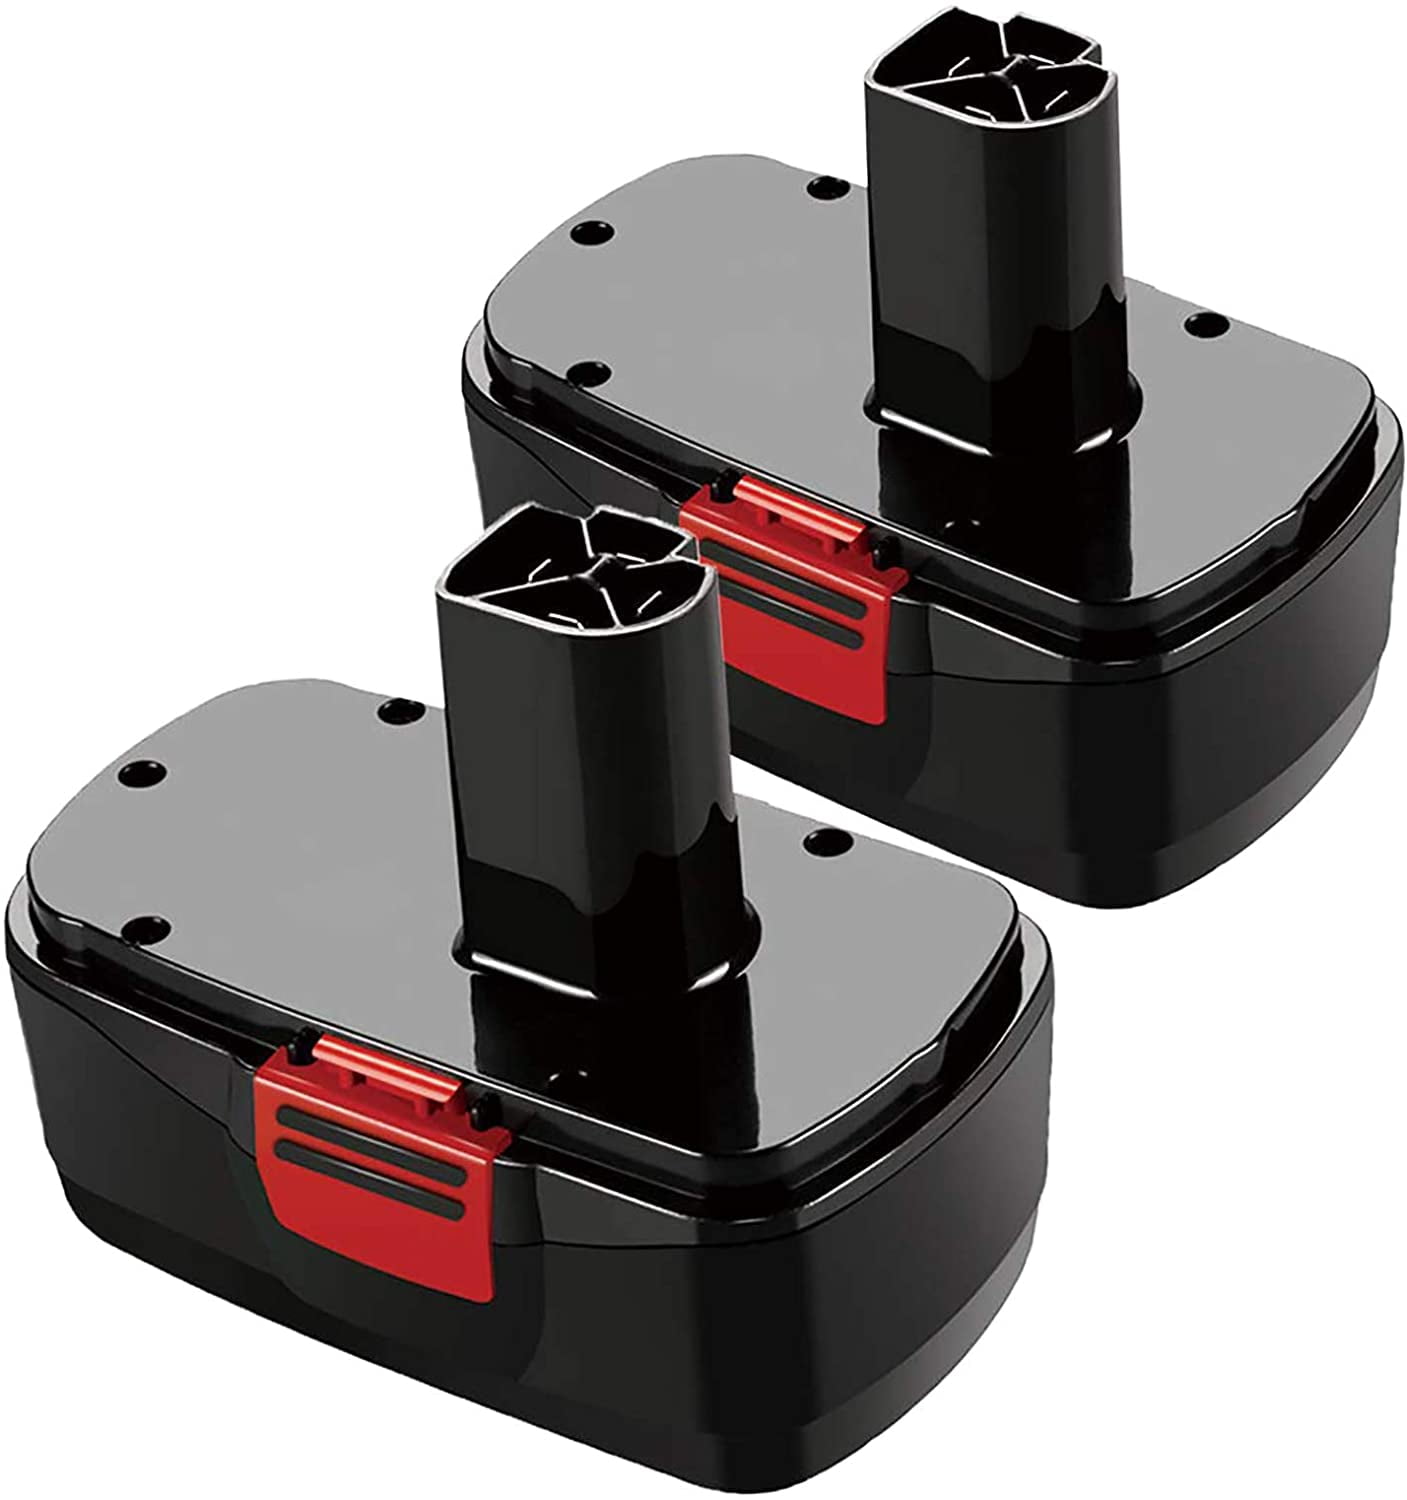 2 Packs 19.2Volt 3.8Ah Replacement Battery compatible for Craftsman DieHard C3 315.115410 315.11485 130279005 1323903 120235021 11375 11376 Cordless Drills 